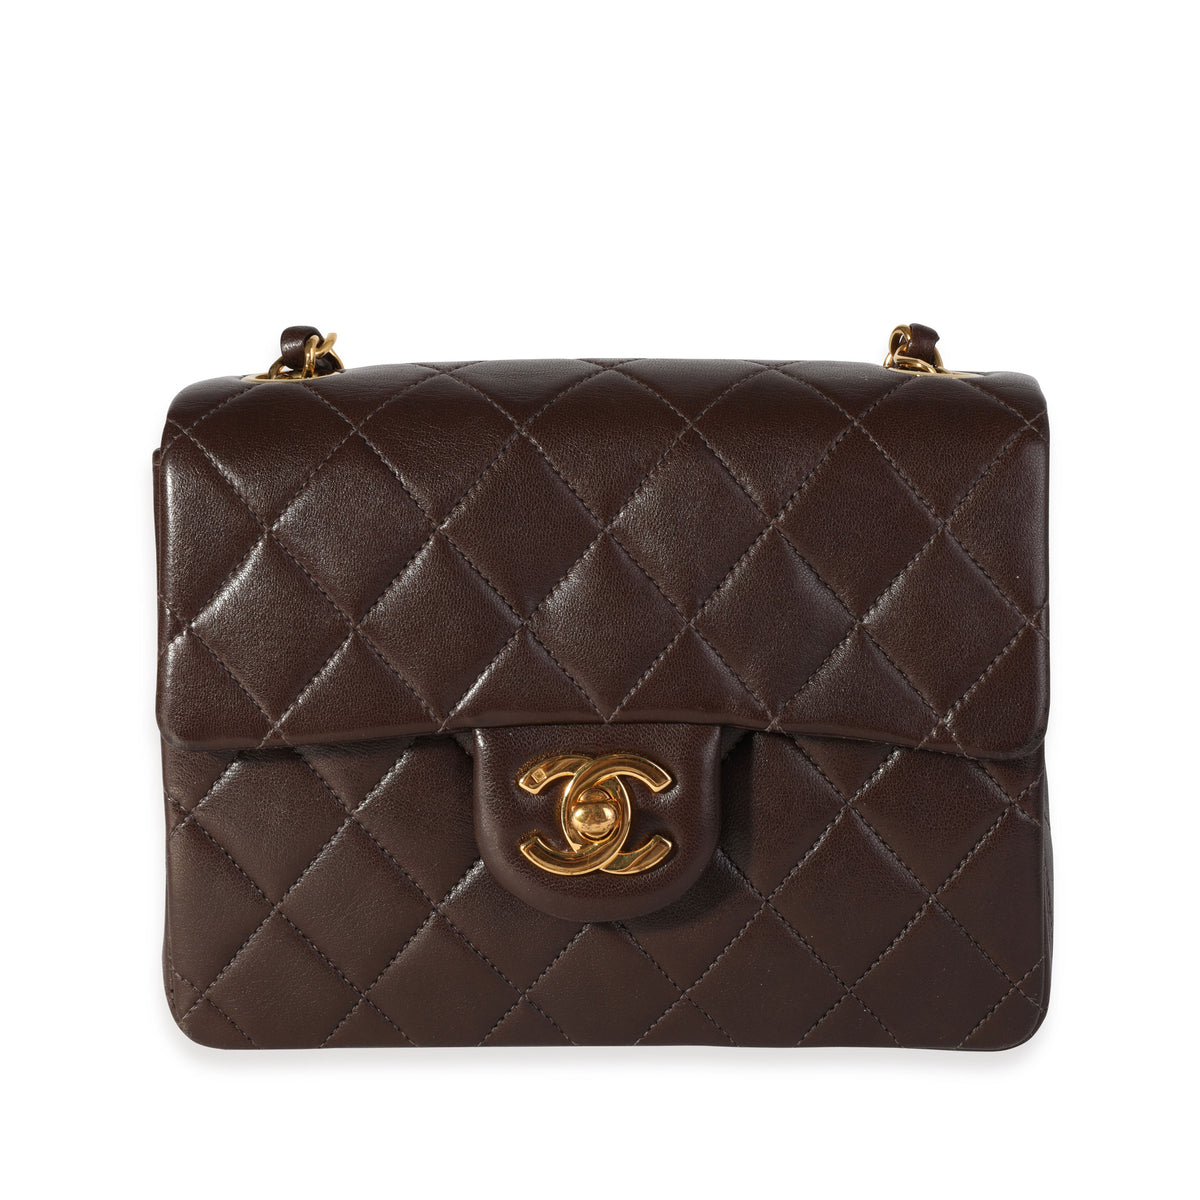 Chanel Vintage Brown Quilted Lambskin Classic Mini Square Flap Bag   myGemma  Item 117323